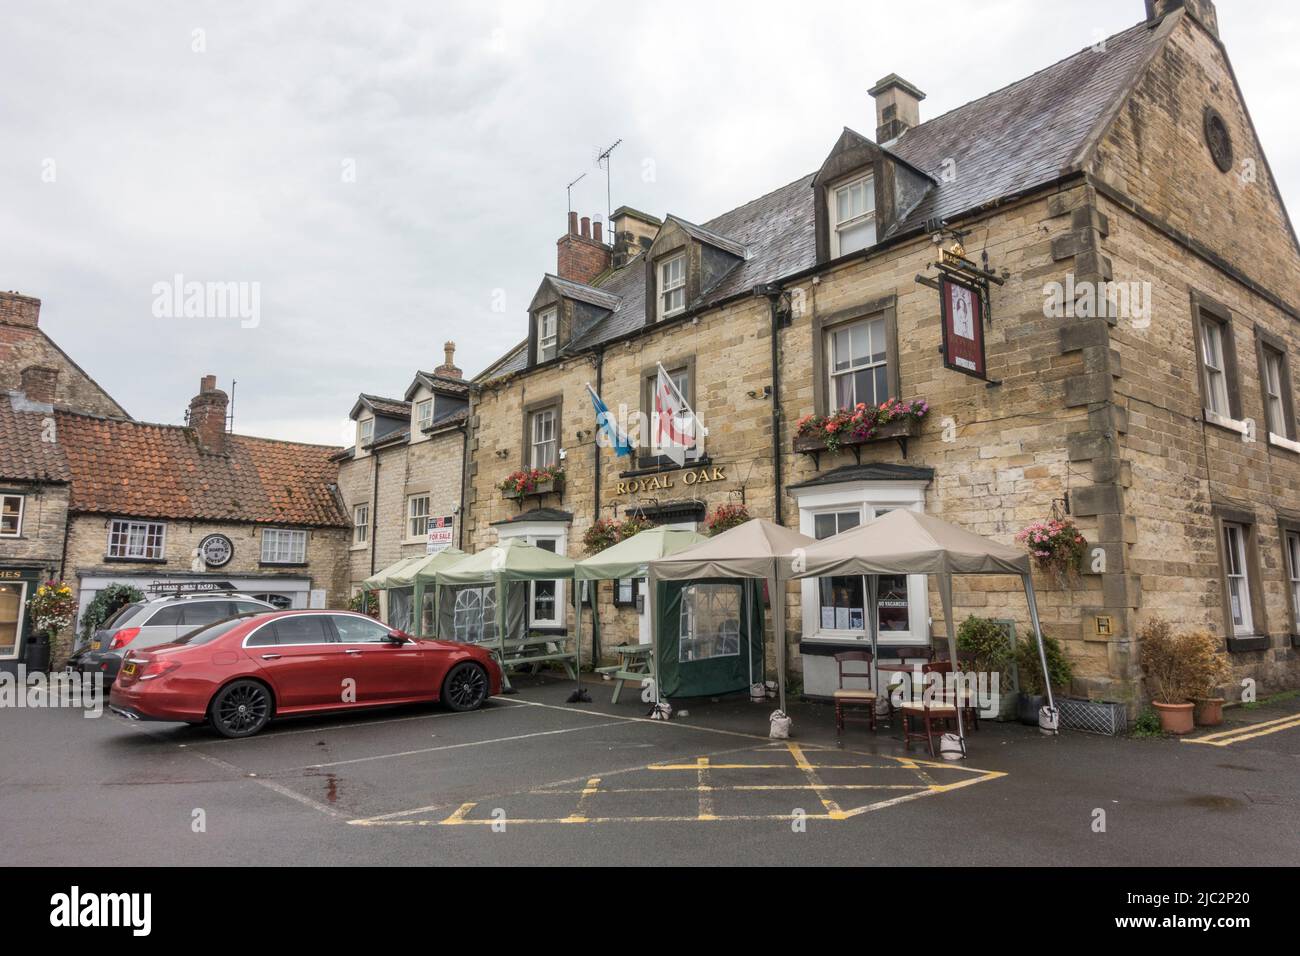 The Royal Oak public house in Market Place in Helmsley, a market town in Ryedale, North Yorkshire, England. Stock Photo